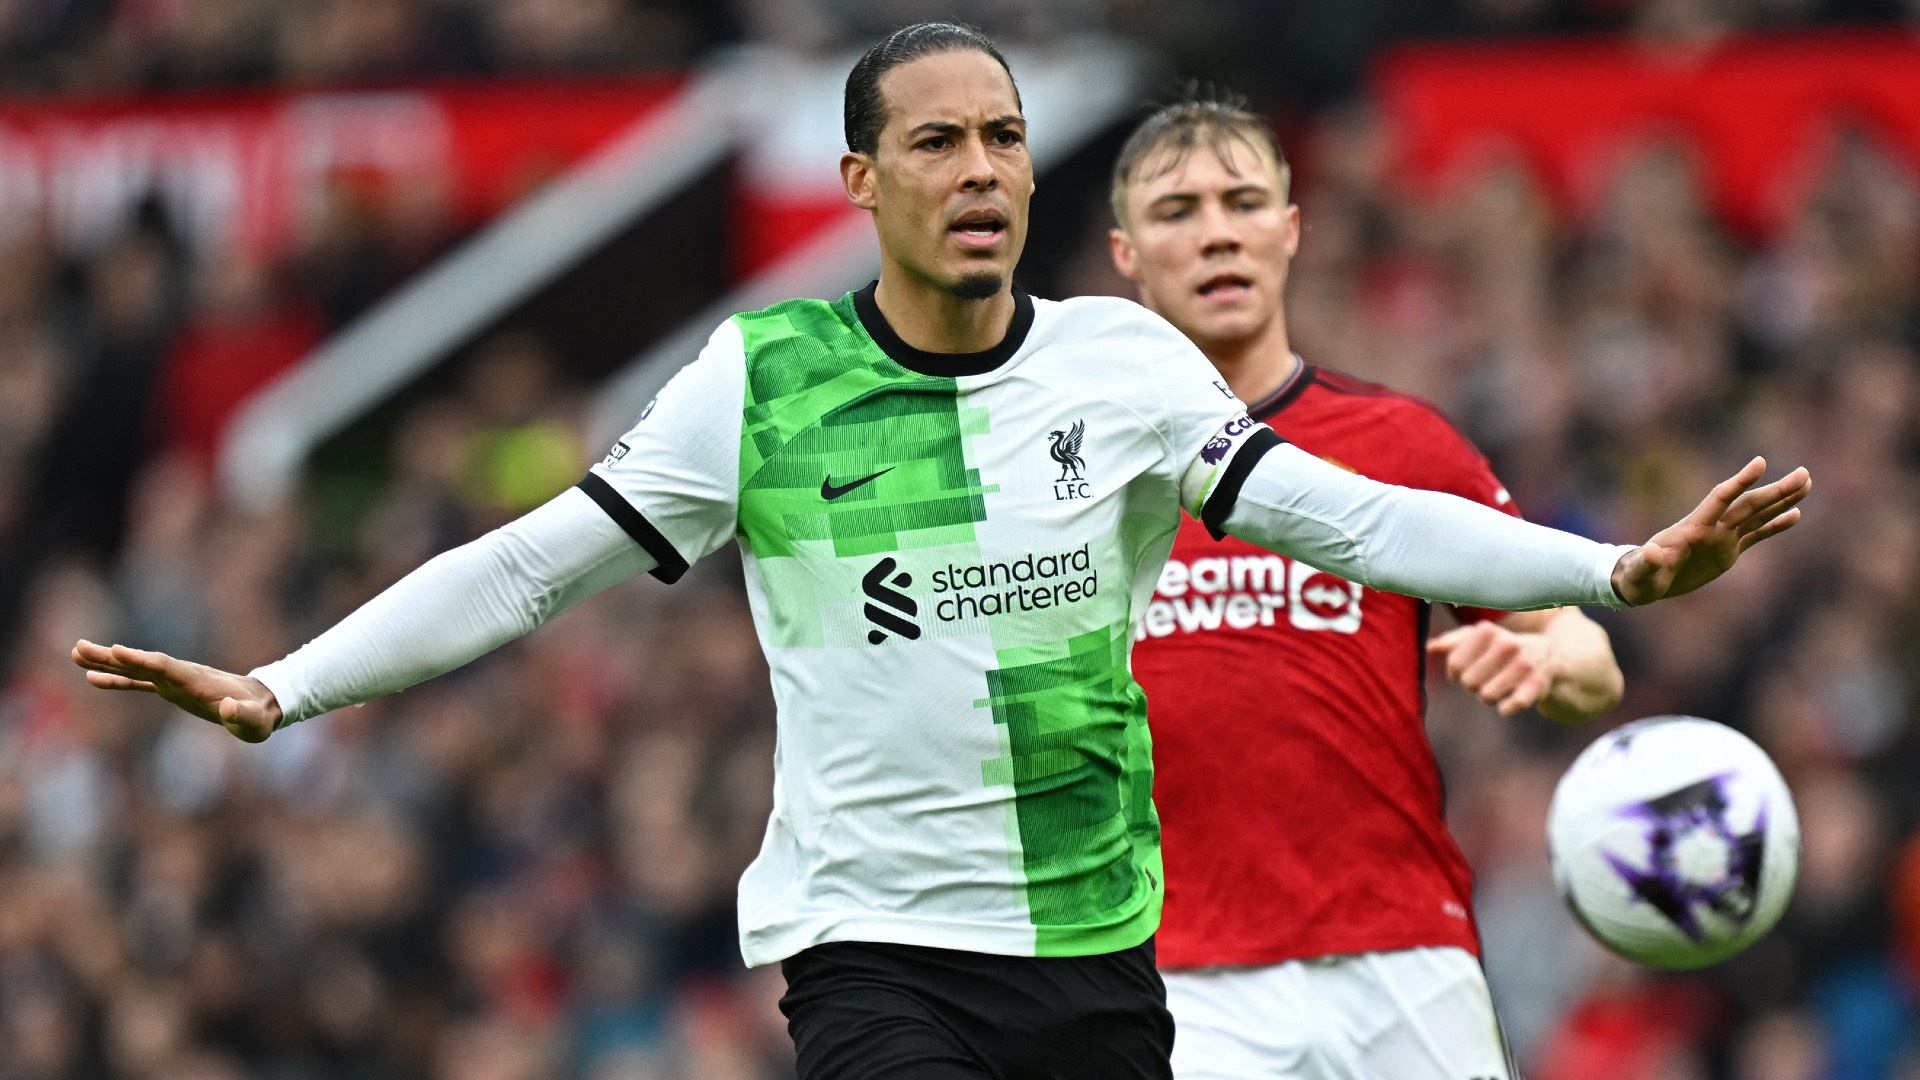 Man Utd draw feels like a defeat for Liverpool in title race, says Van Dijk